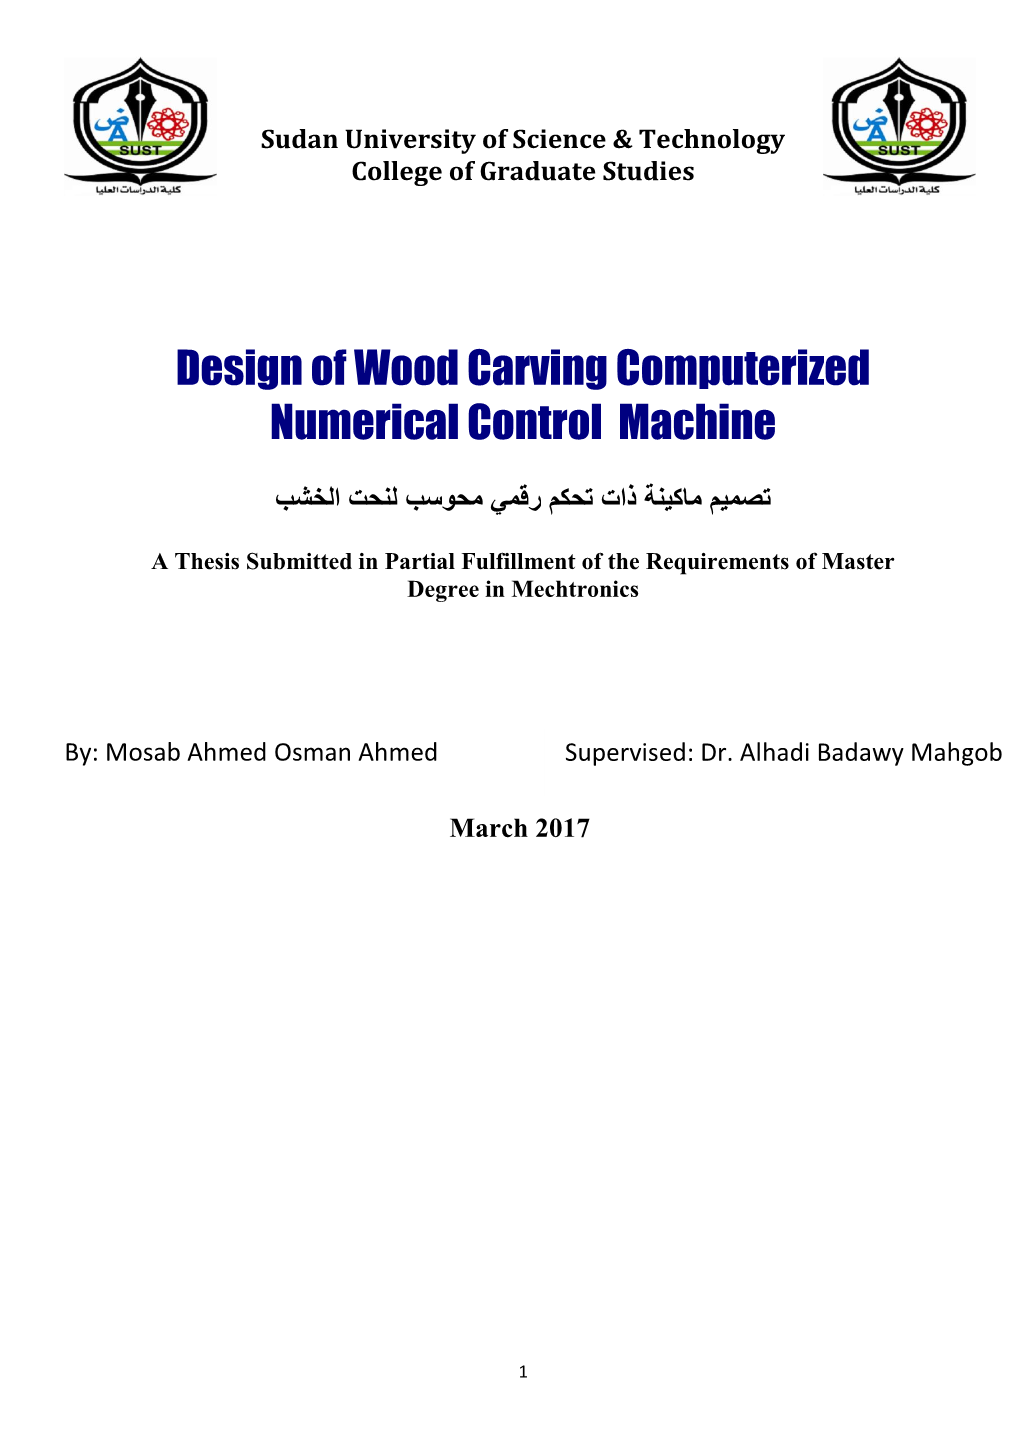 Design of Wood Carving Computerized Numerical Control Machine